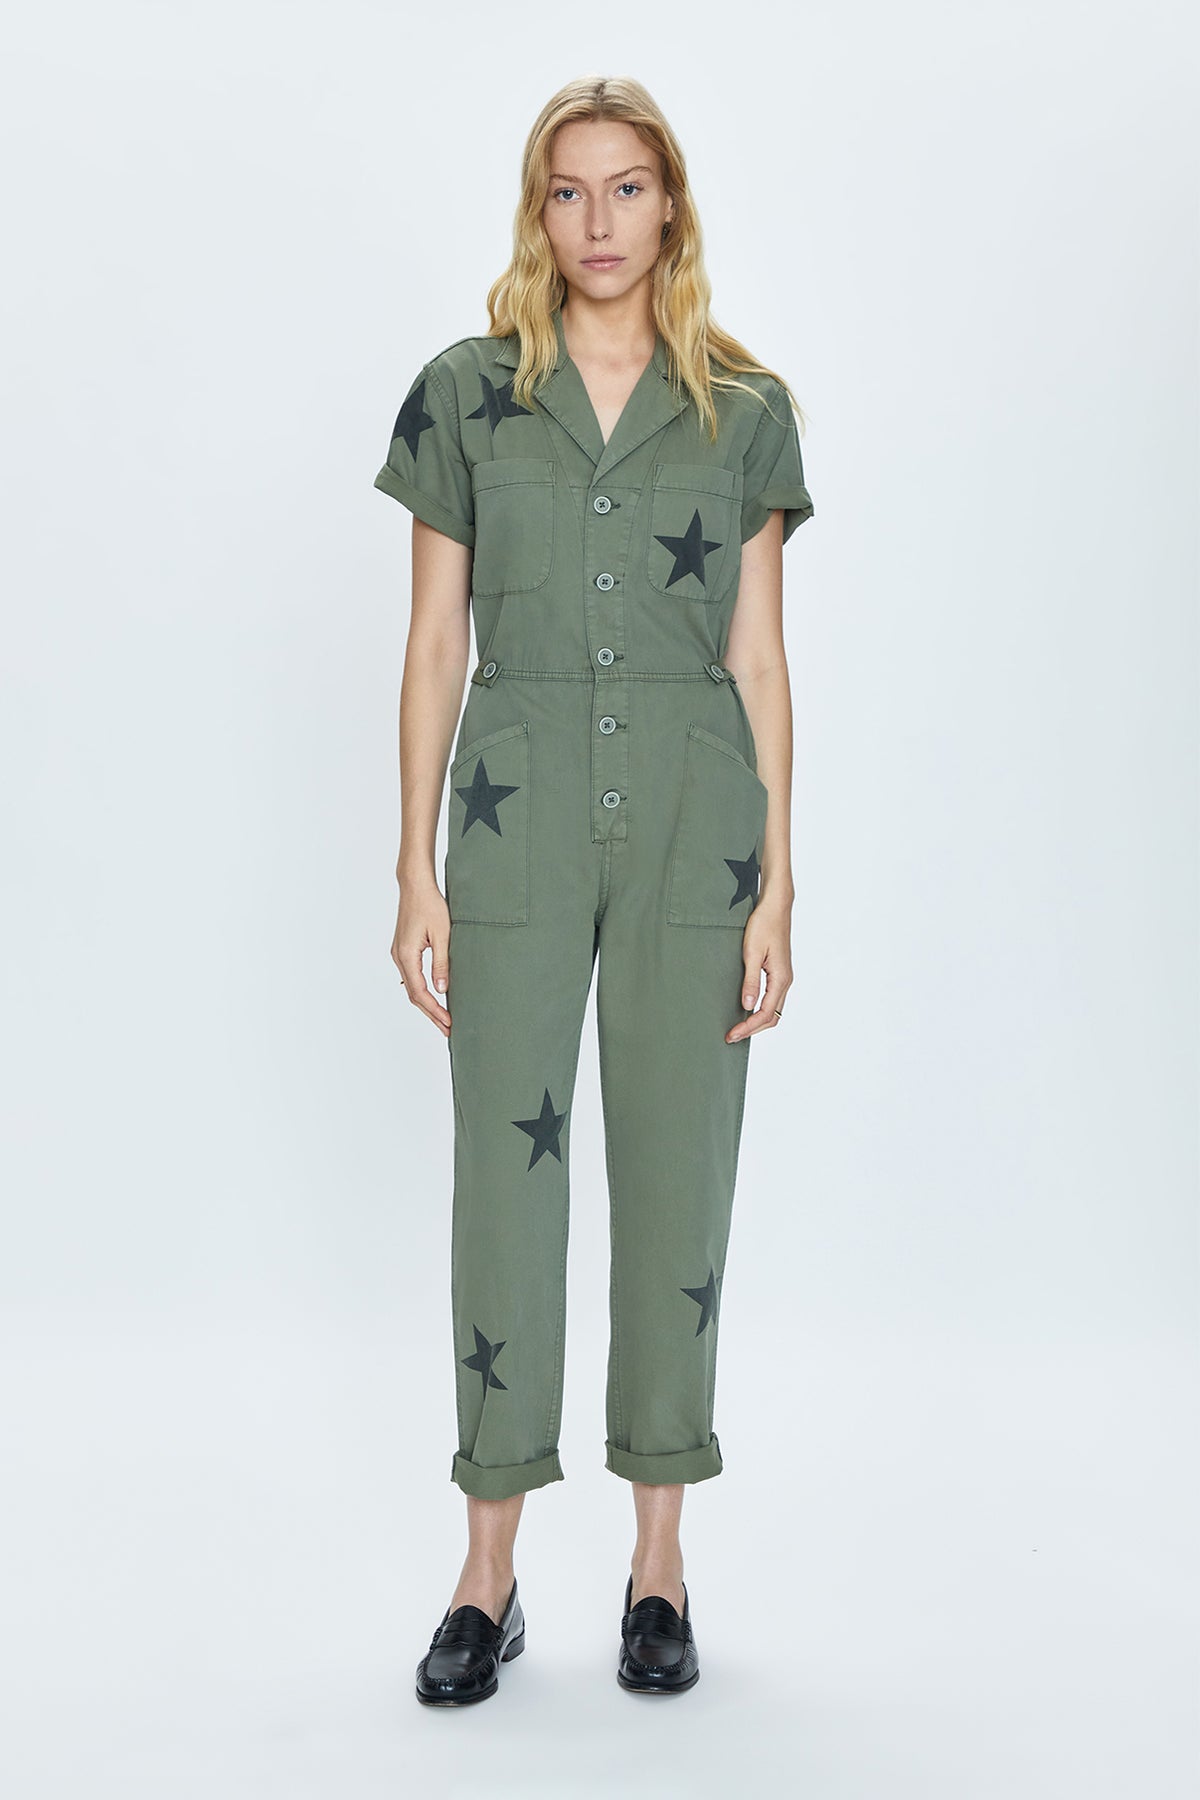 Grover Short Sleeve Field Suit - Royal Honor